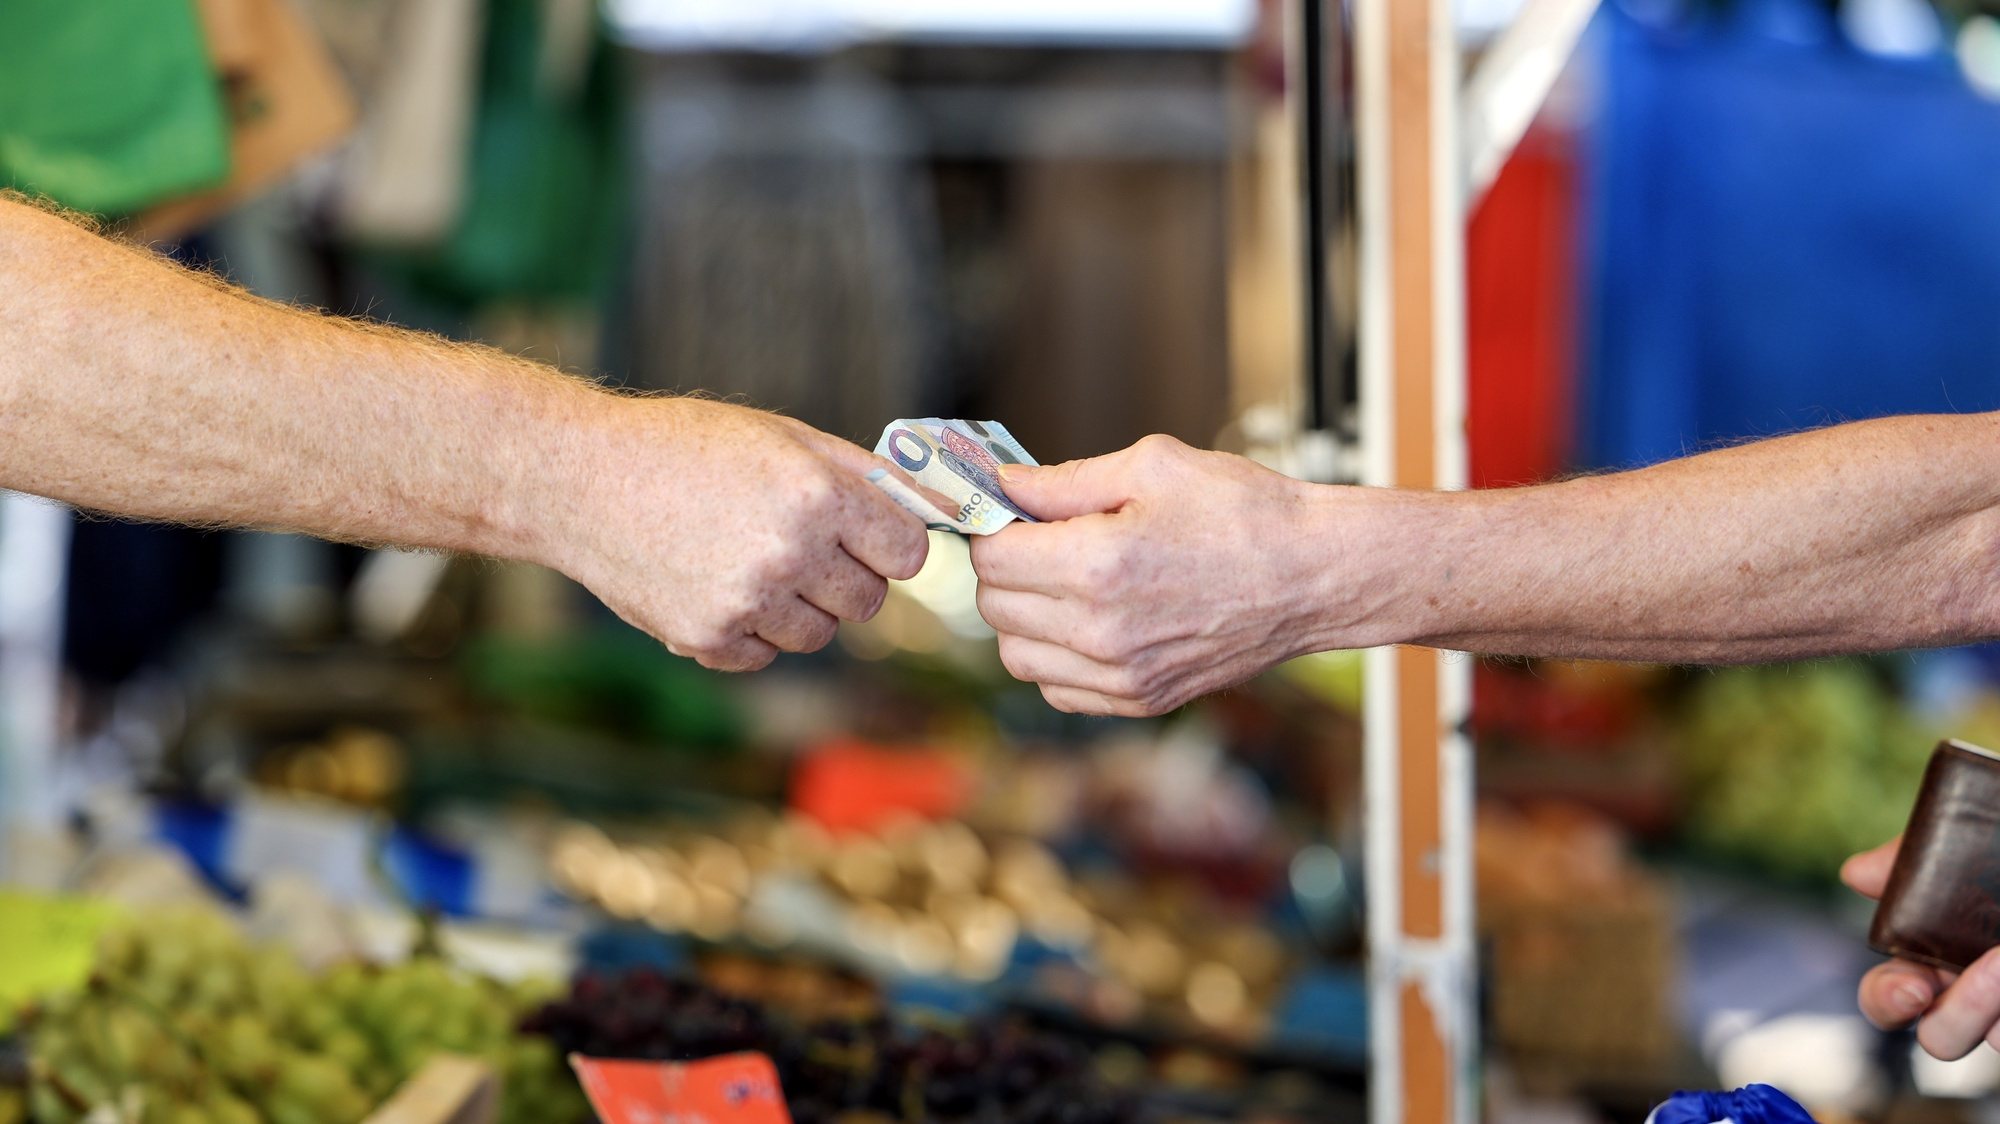 epa10843379 A customer pays for their purchase at a weekly market, in Essen, Germany, 06 September 2023. According to German government&#039;s statistics, food prices in July 2023 were on average 11 percent higher compared to the same period in 2022. German welfare organizations reported in 2022 that 13.8 million people in Germany lived in poverty or were at risk of being below the poverty line.  EPA/CHRISTOPHER NEUNDORF